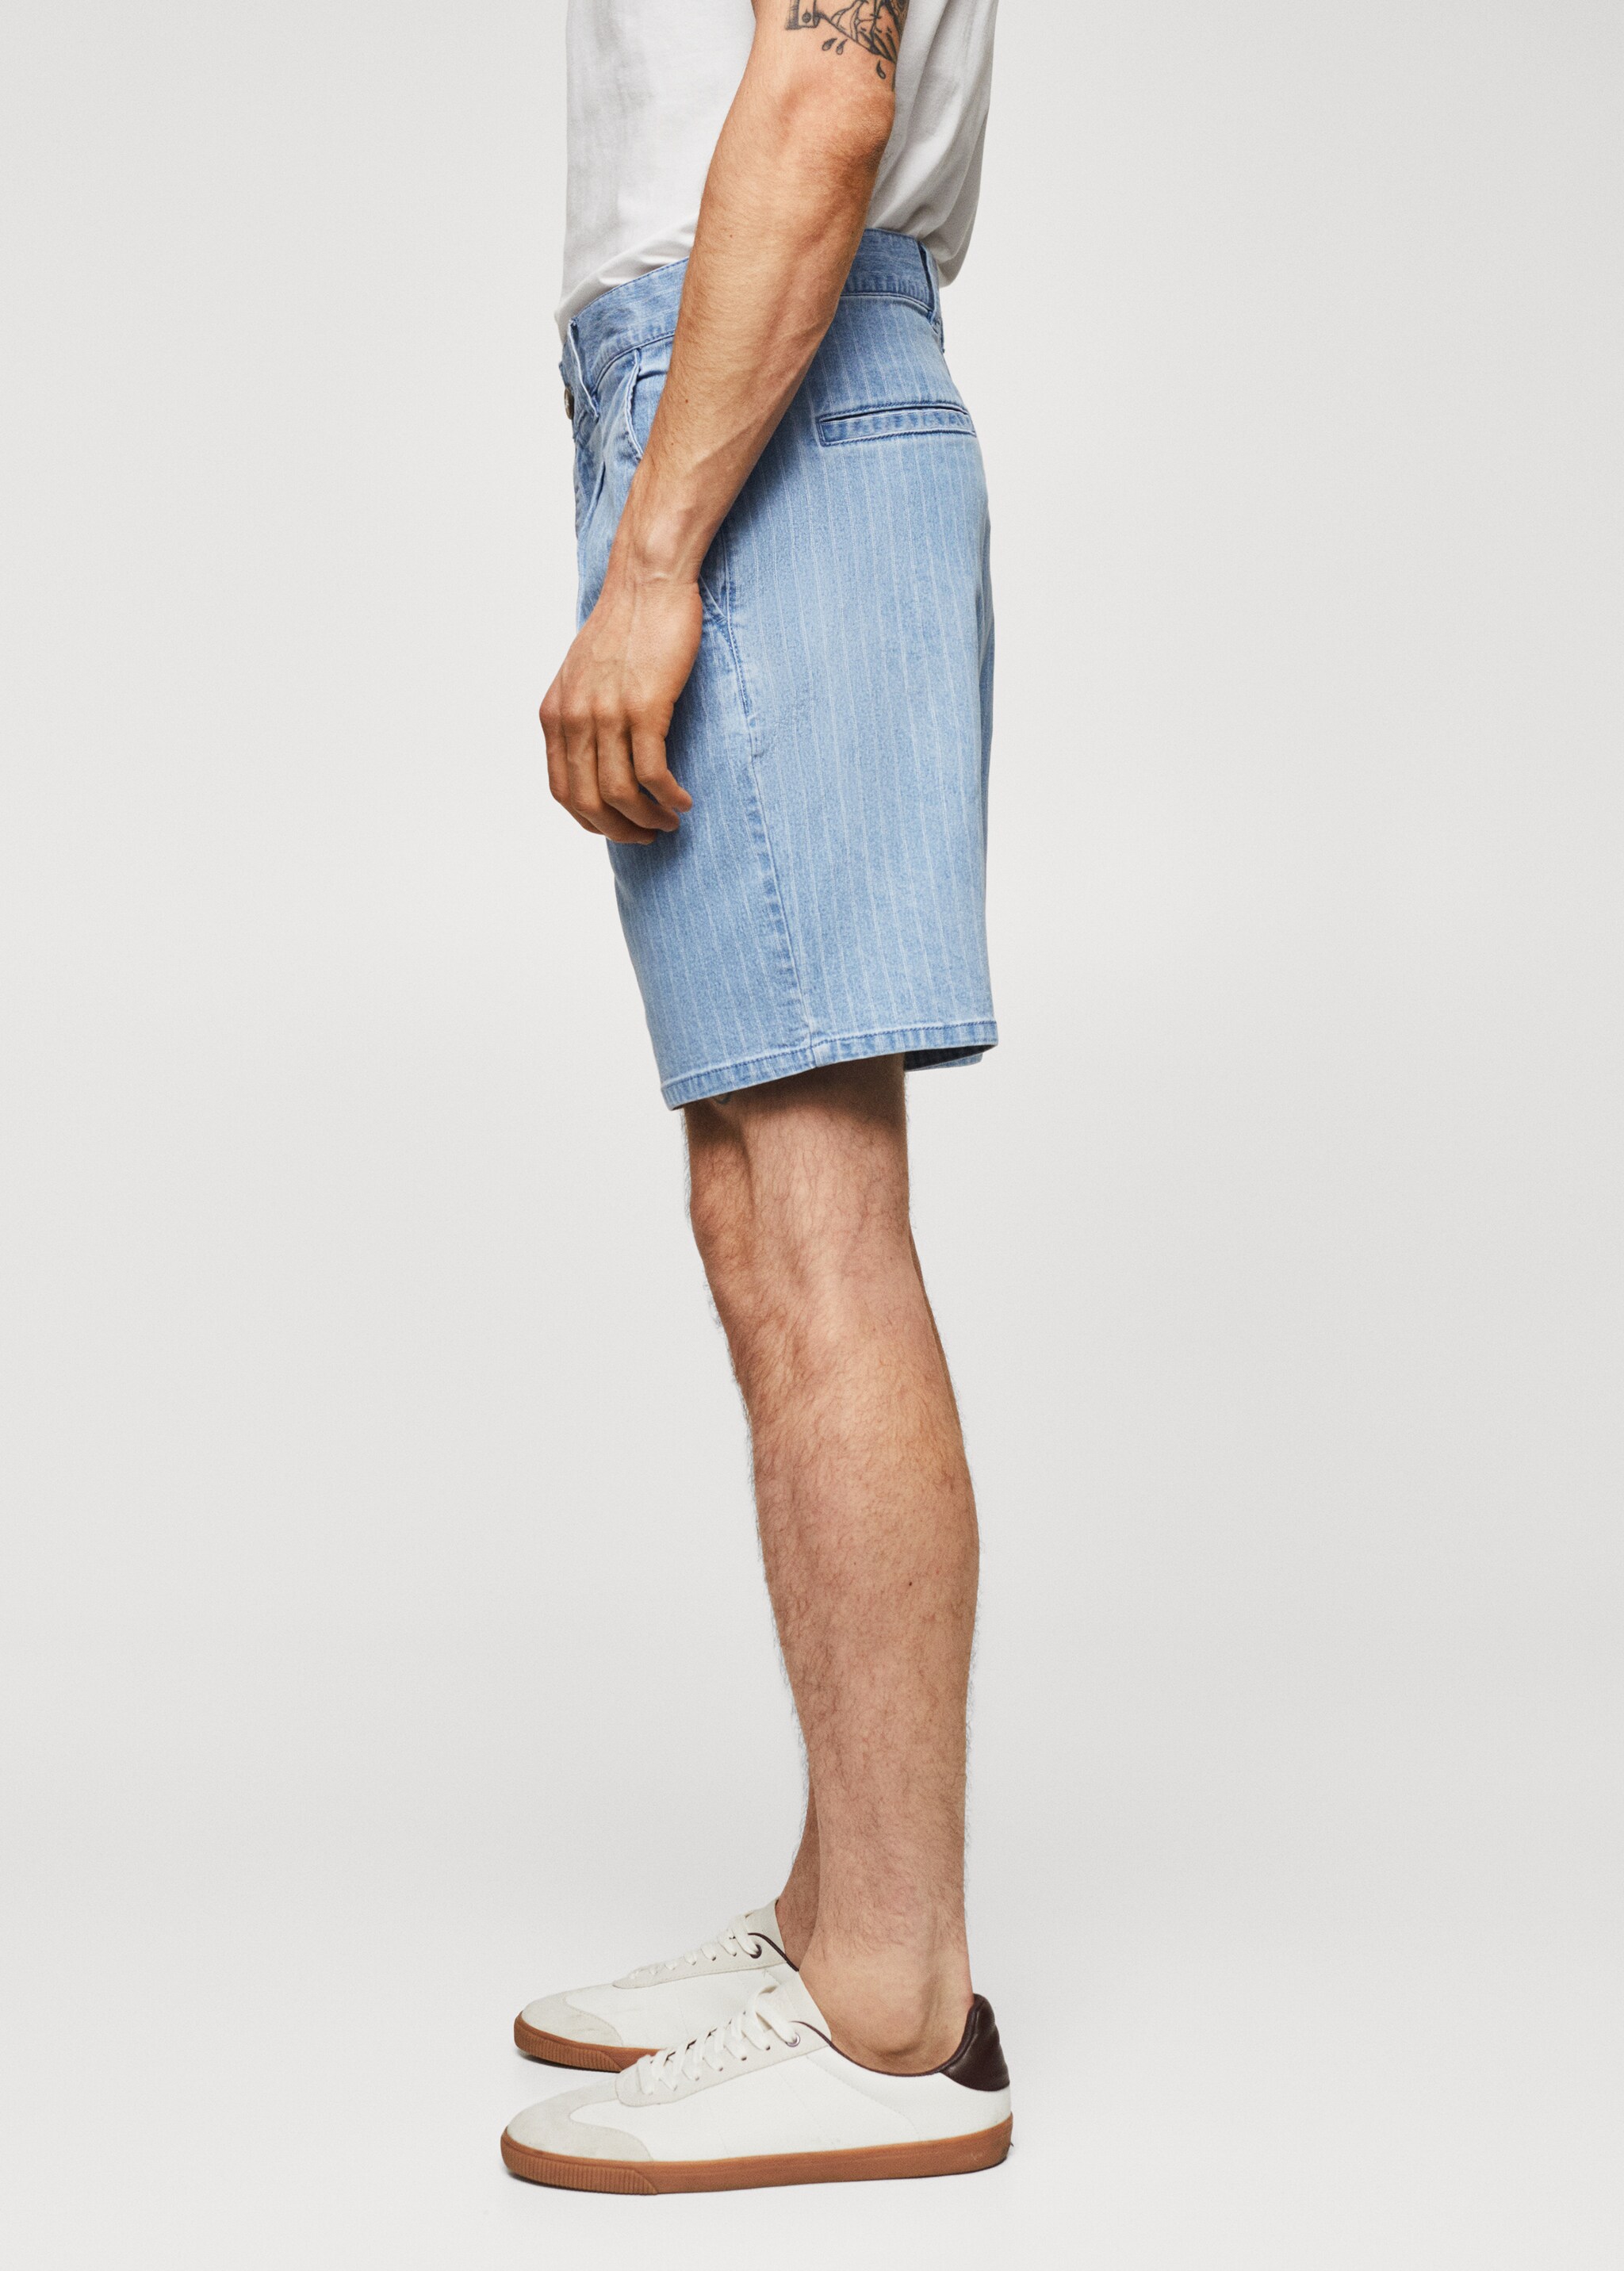 Striped denim shorts - Details of the article 4